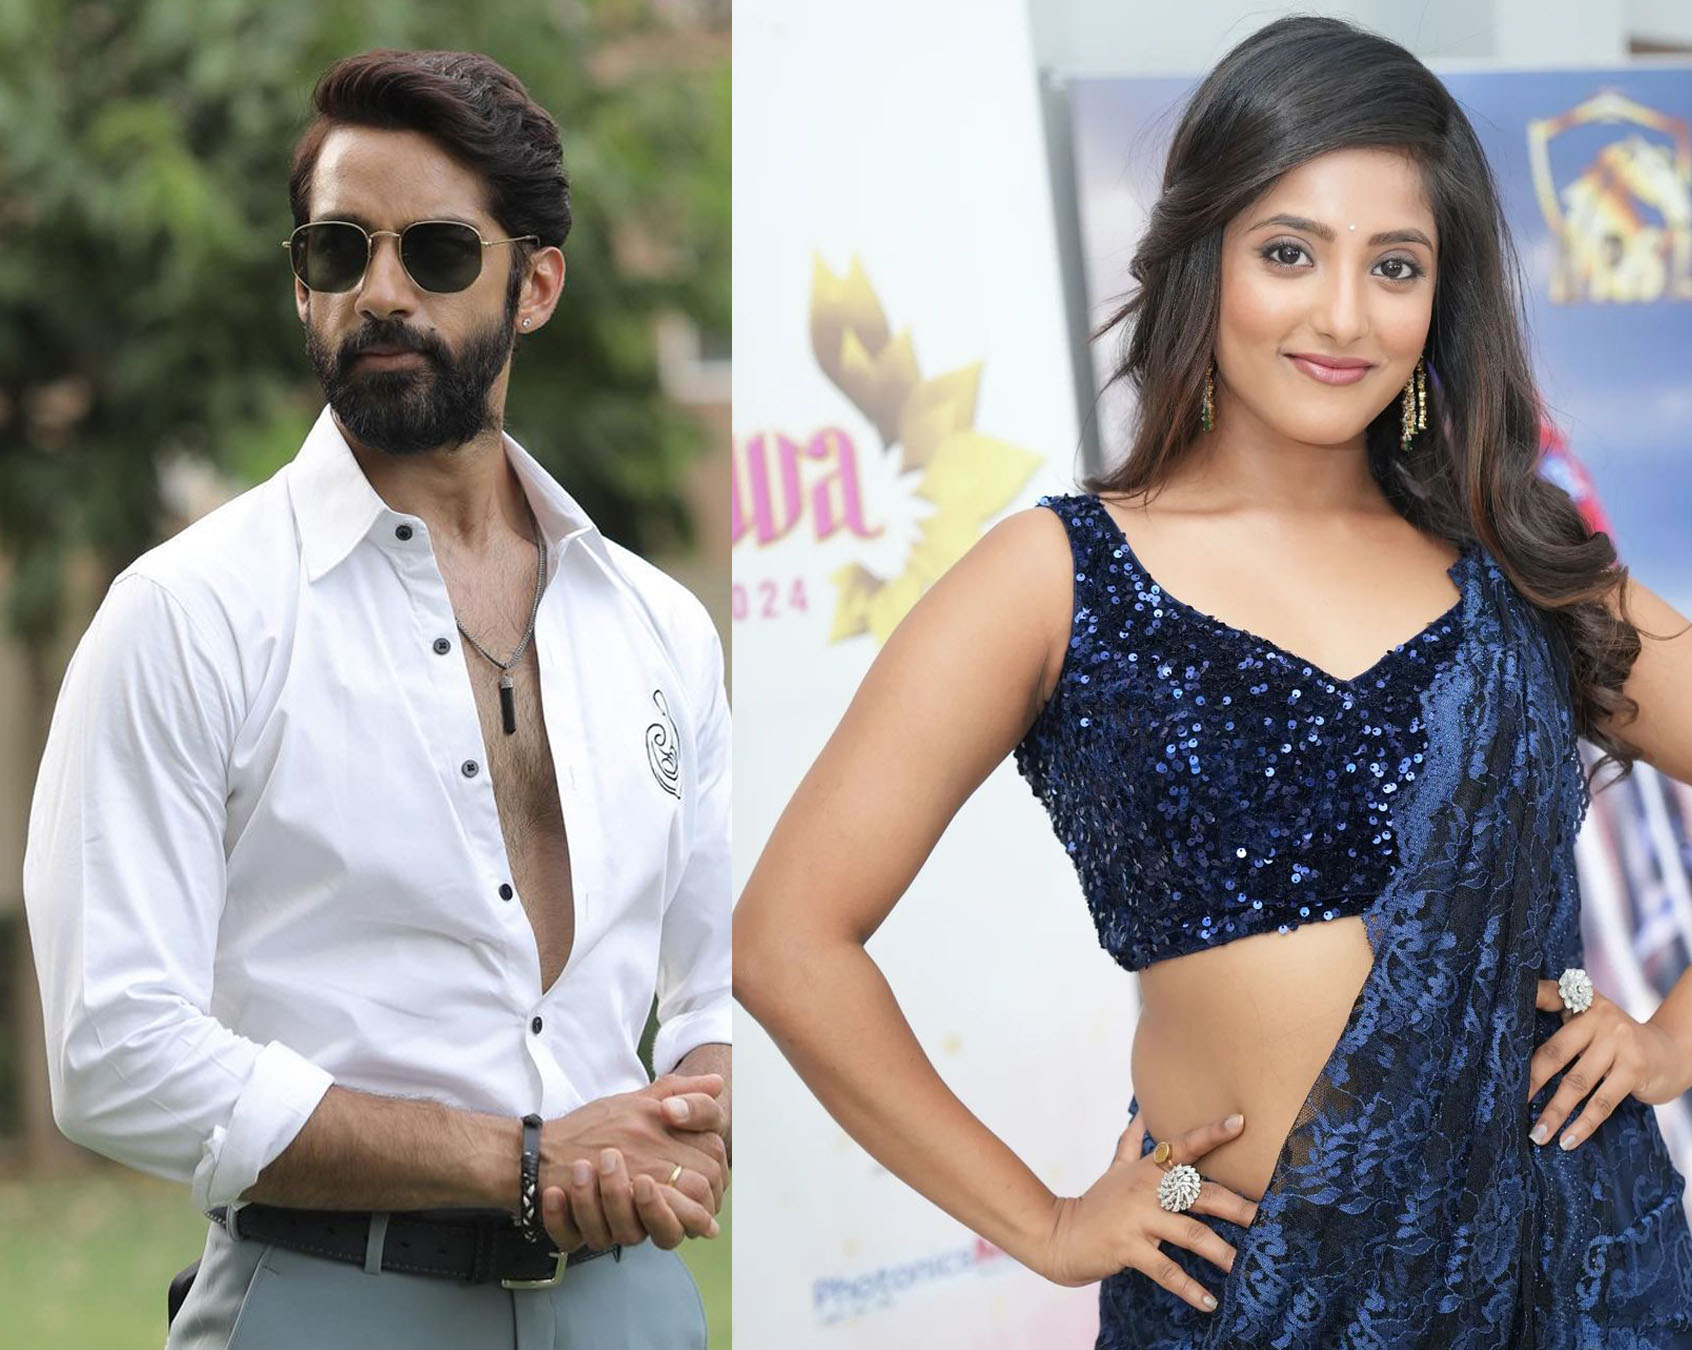 Exclusive- Karan Vohra To Play Lead Opposite To Adorable Actress Ulka Gupta In The Upcoming Show. It Seems That Manasvi Vashist Is Not!